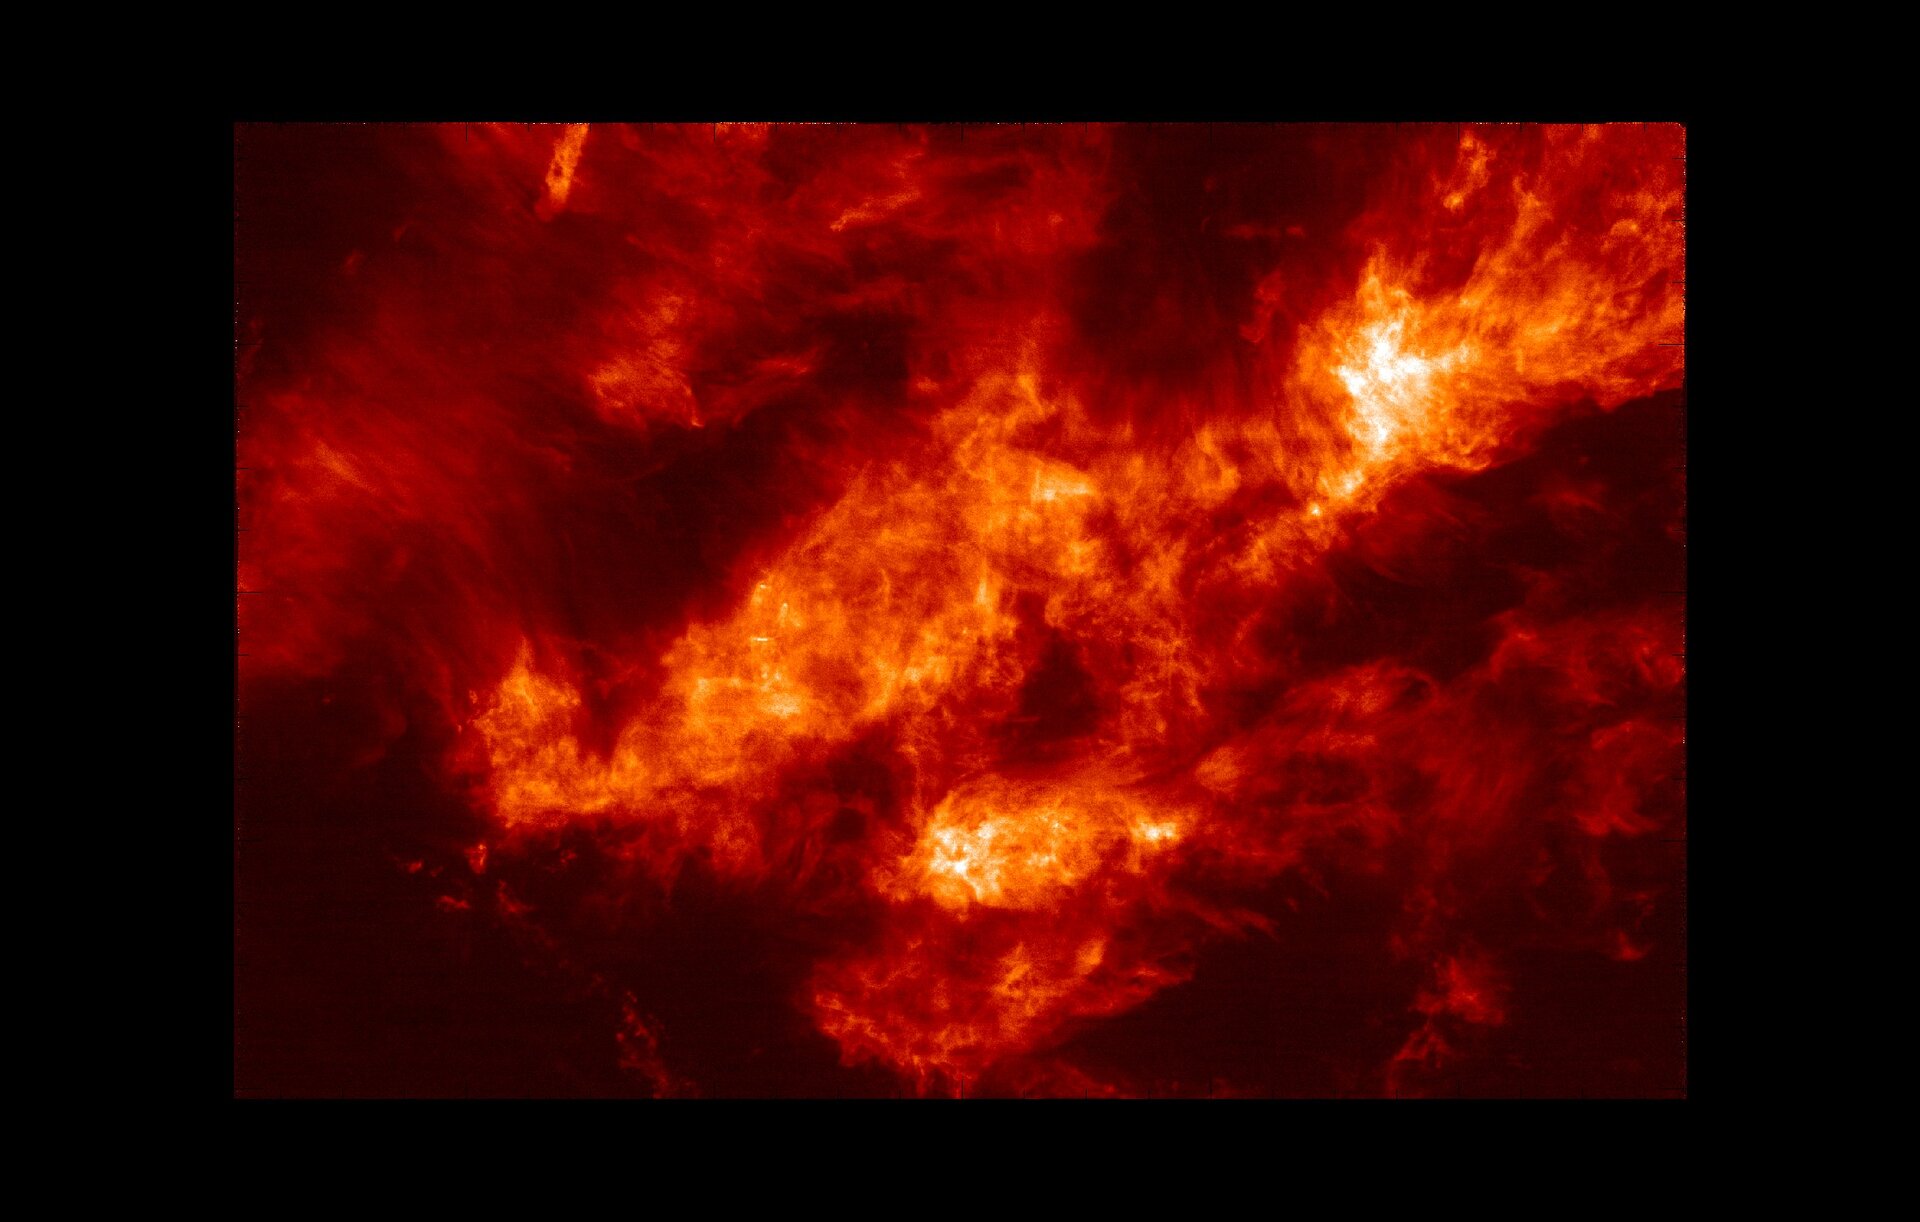 The Taurus Molecular Cloud containing over 400 young stars